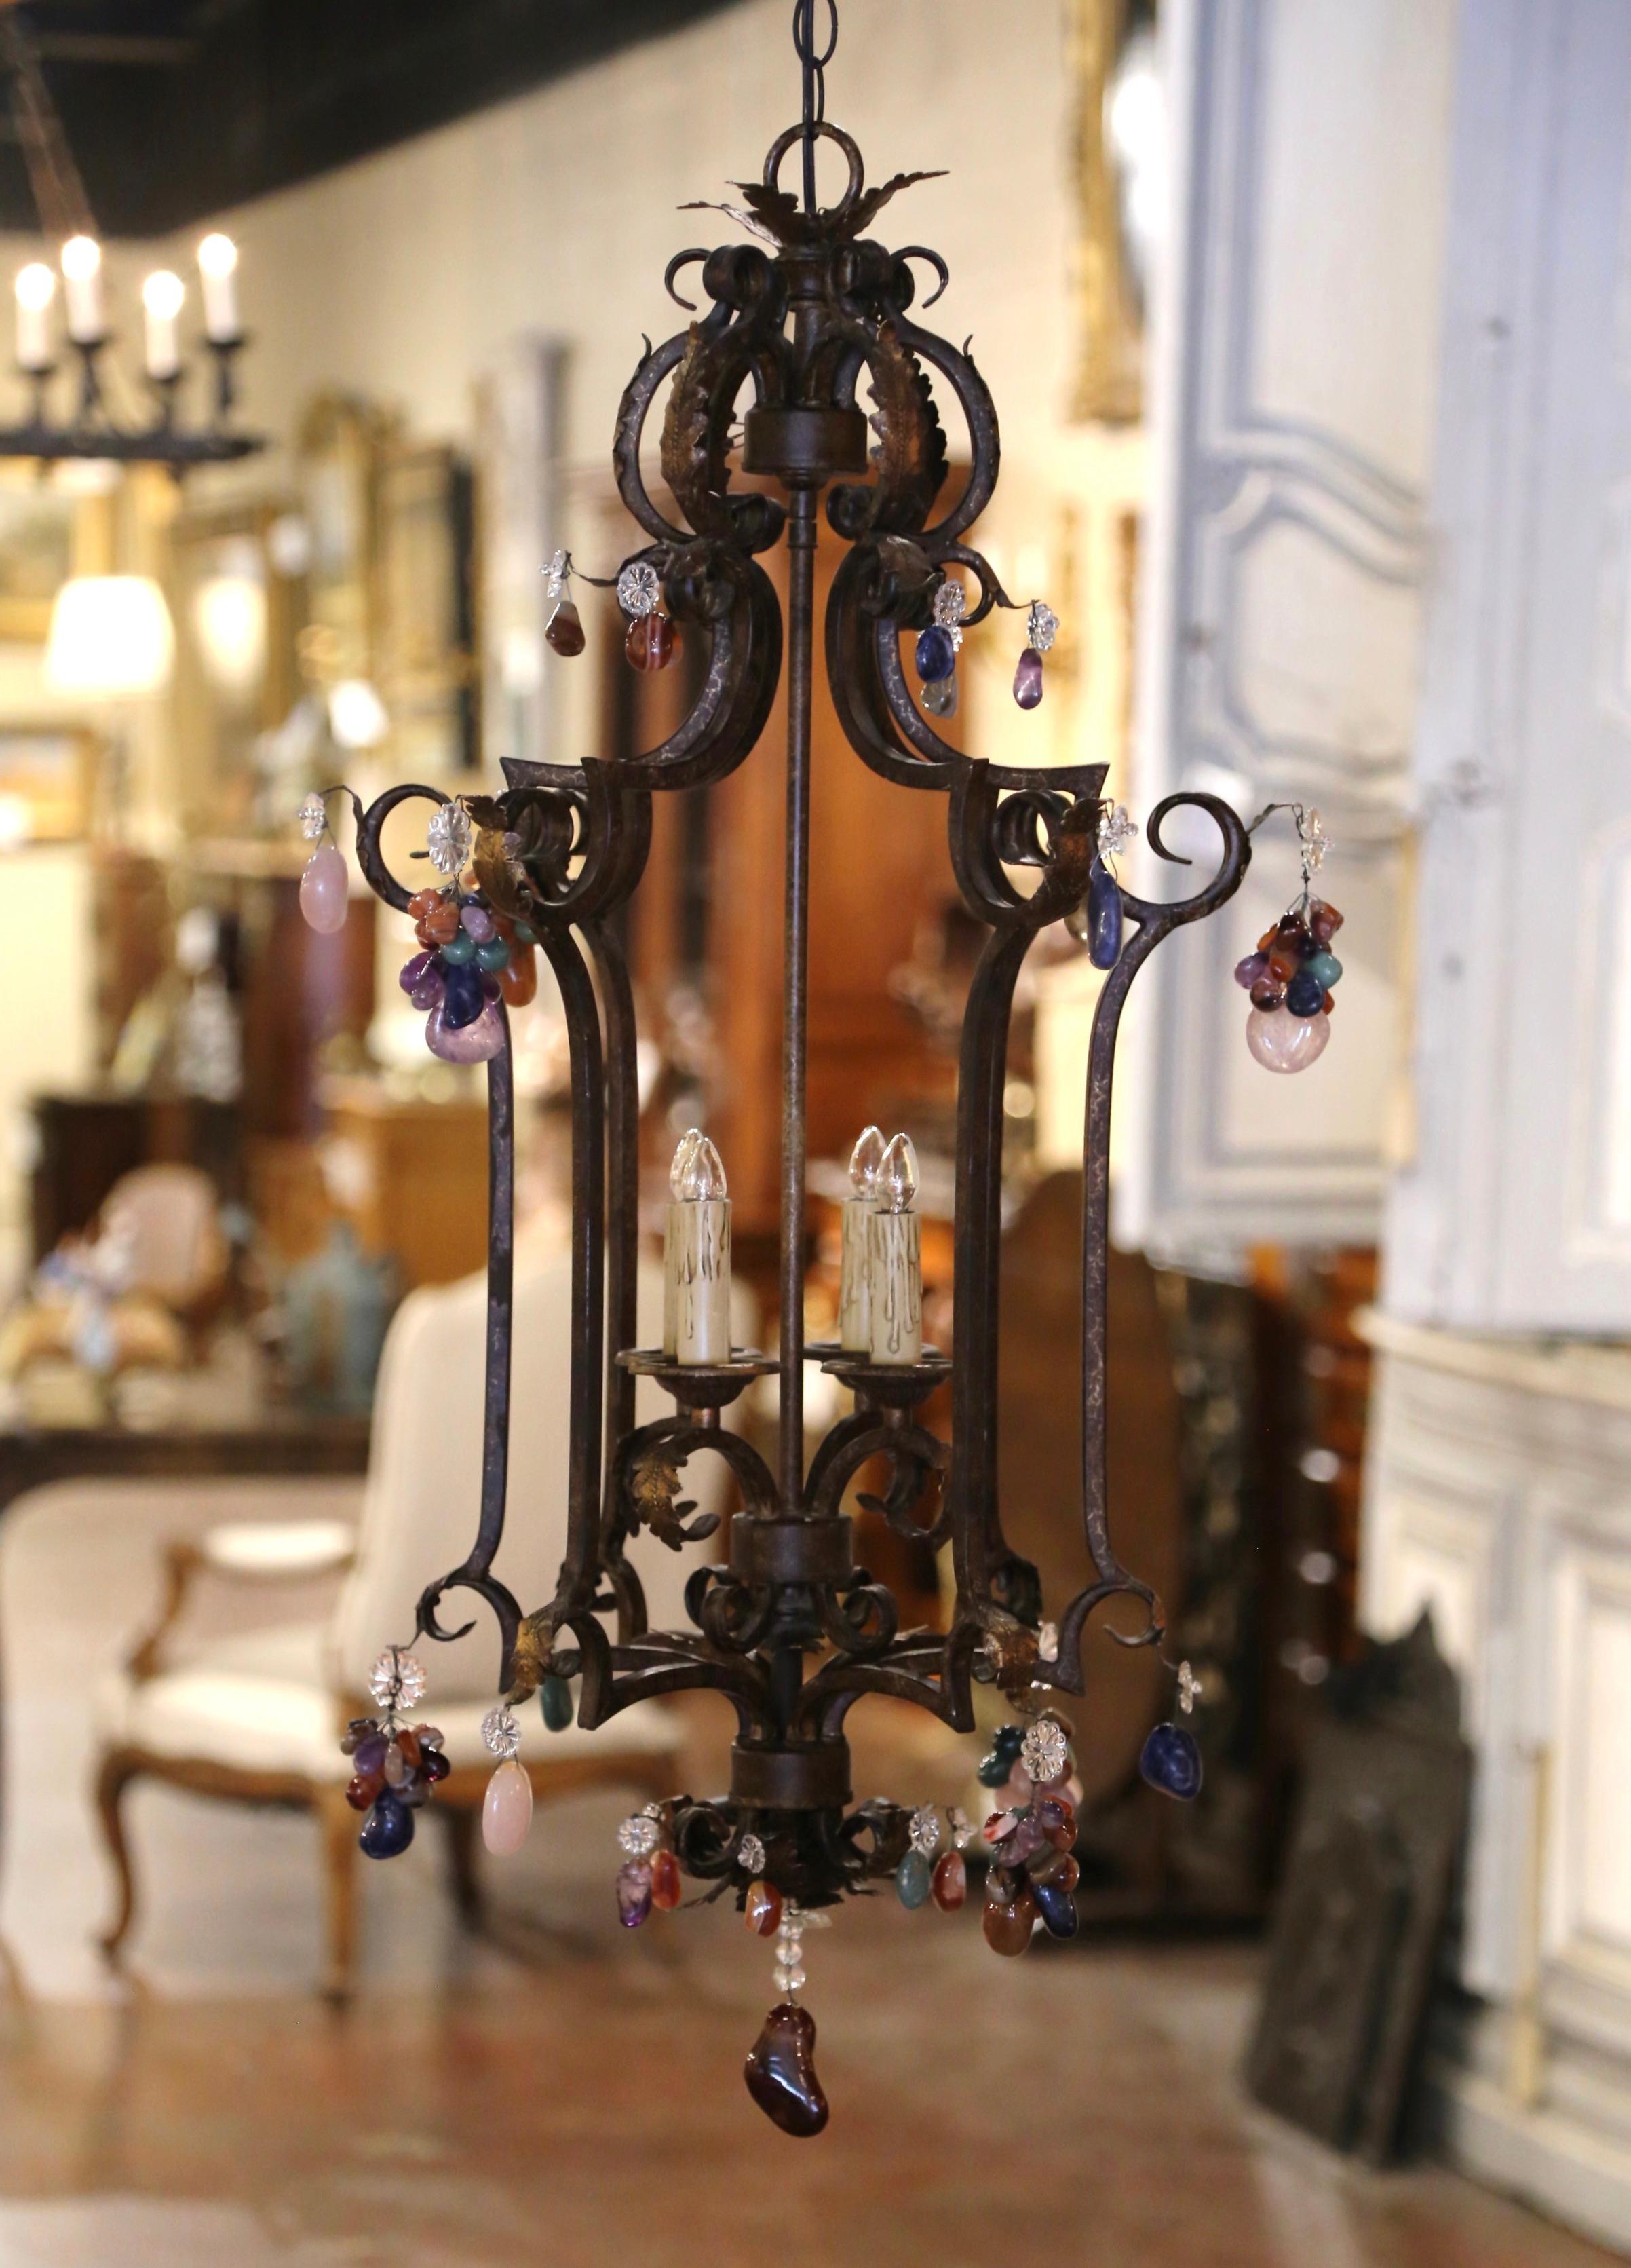 Crafted in France circa 1970, and square in shape, the lantern built of iron is decorated throughout with colorful crystal pendants, including bunch of grapes motifs. The tall lantern features a scrolled top, and is decorated with a pierced ornate